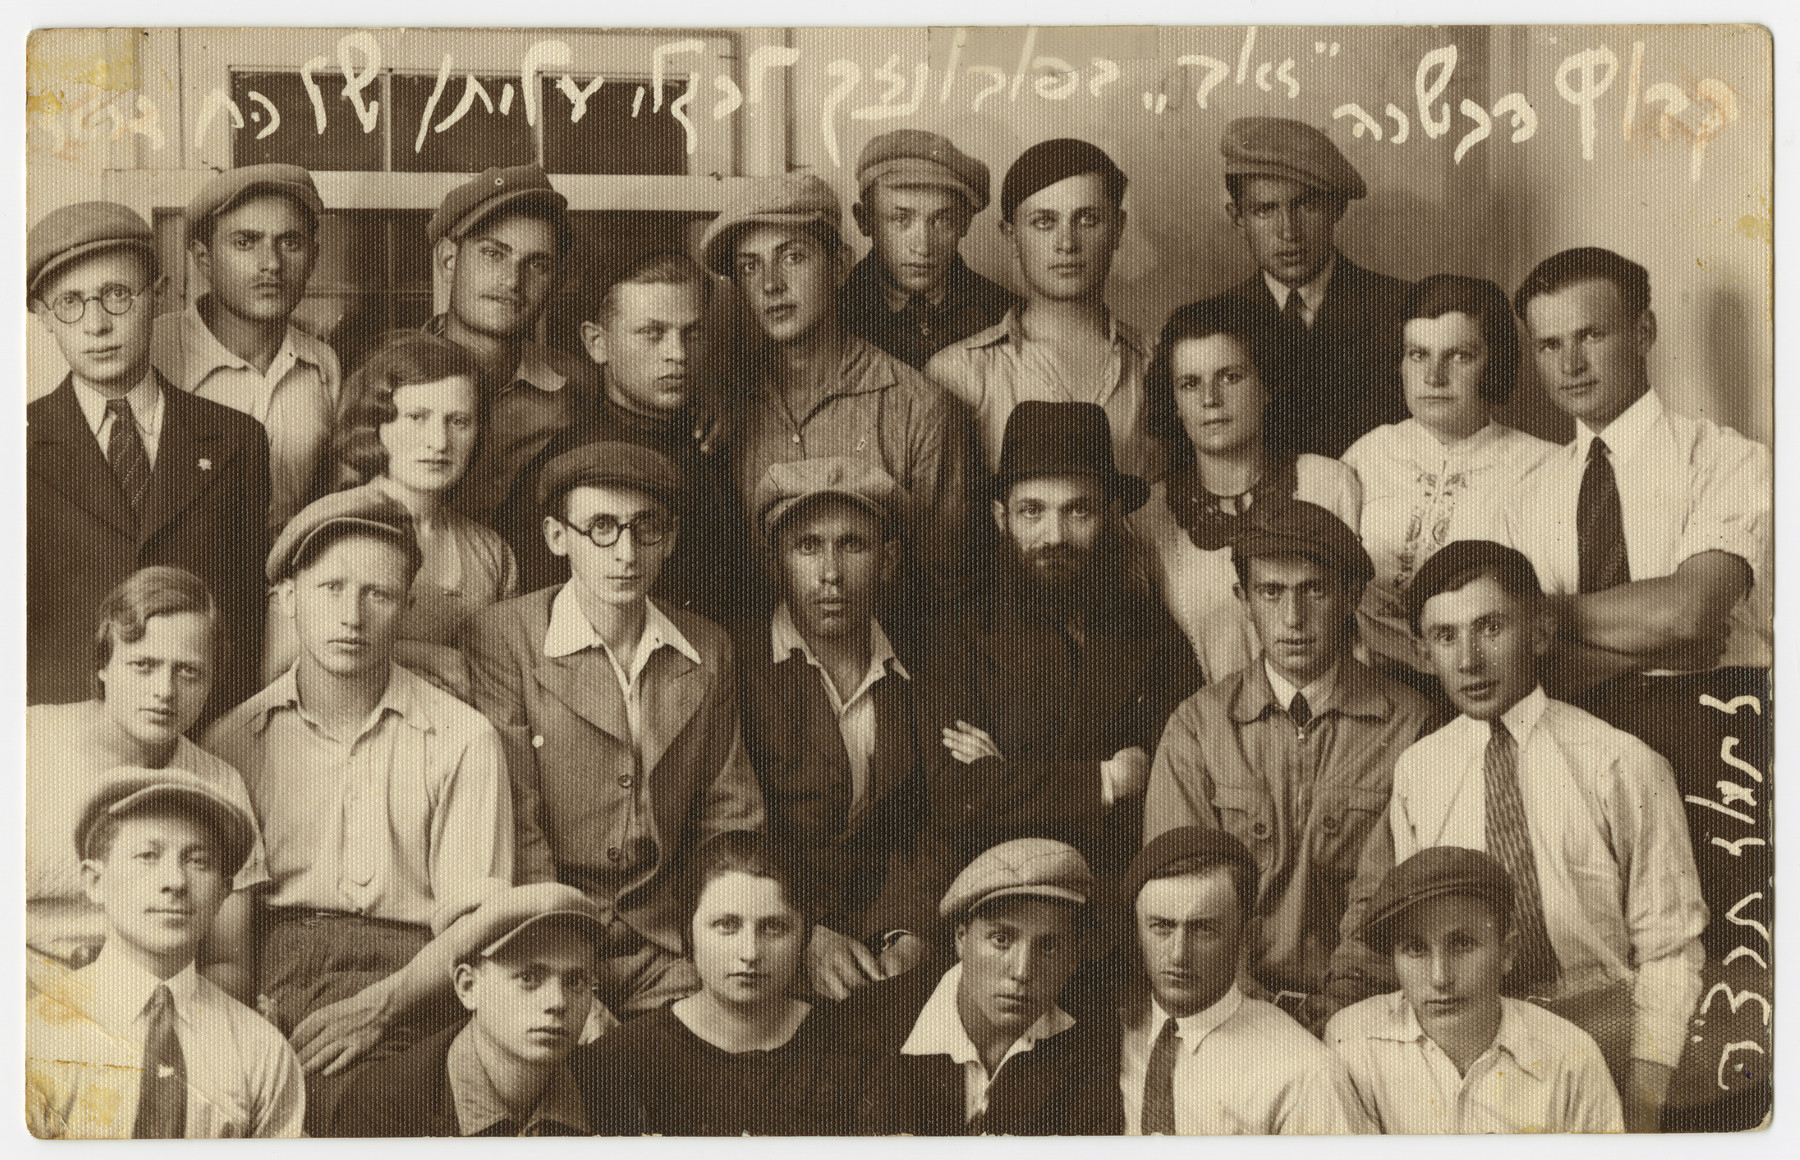 Asher Fetherhar (later Zidon) poses with members of the Hechalutz Mizrachi hachshara probably in Powazki.